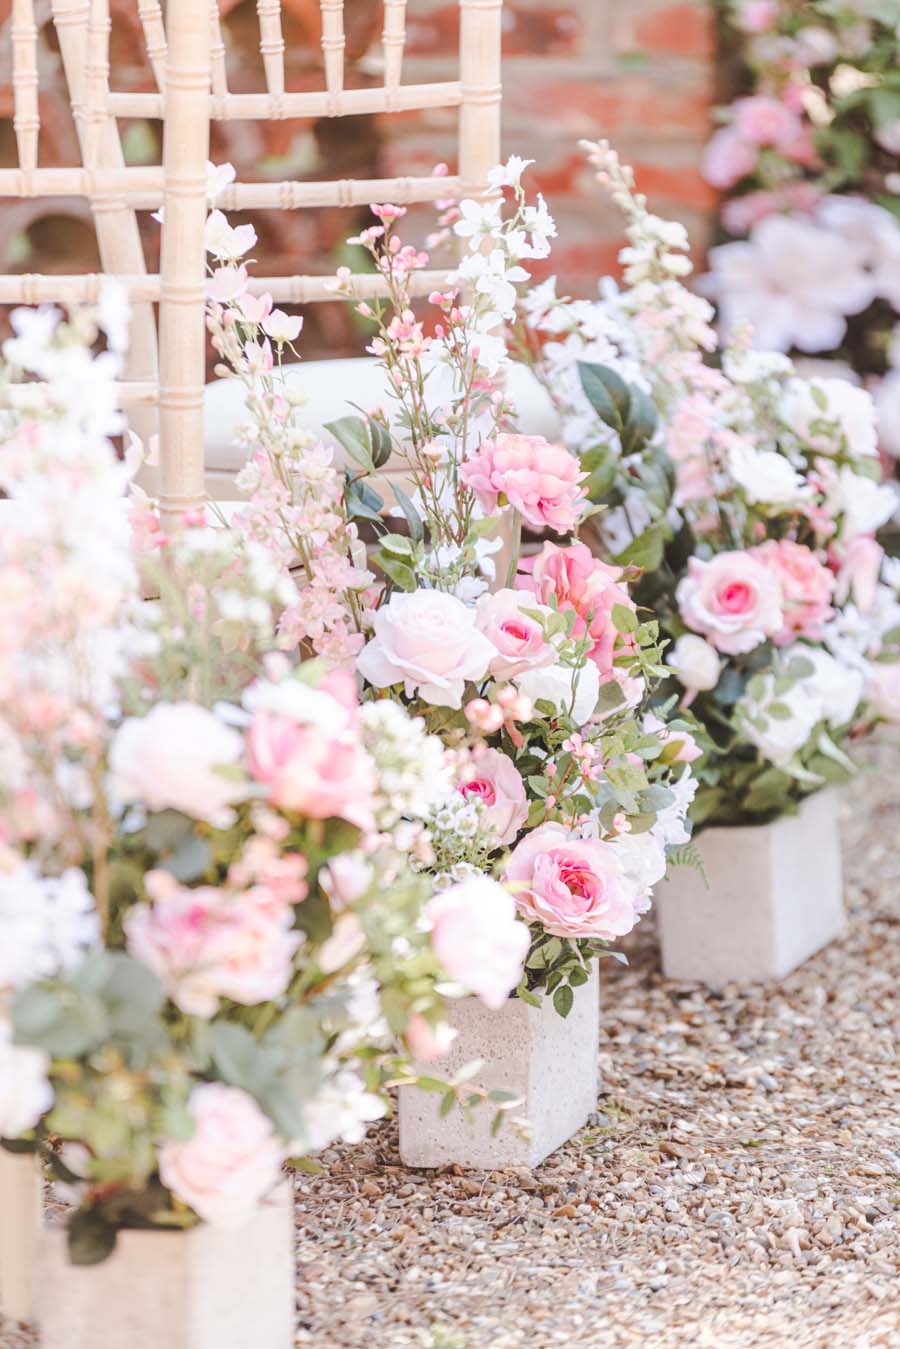 Under The Floral Spell Wedding Décor Inspiration at Wotton House, Surrey